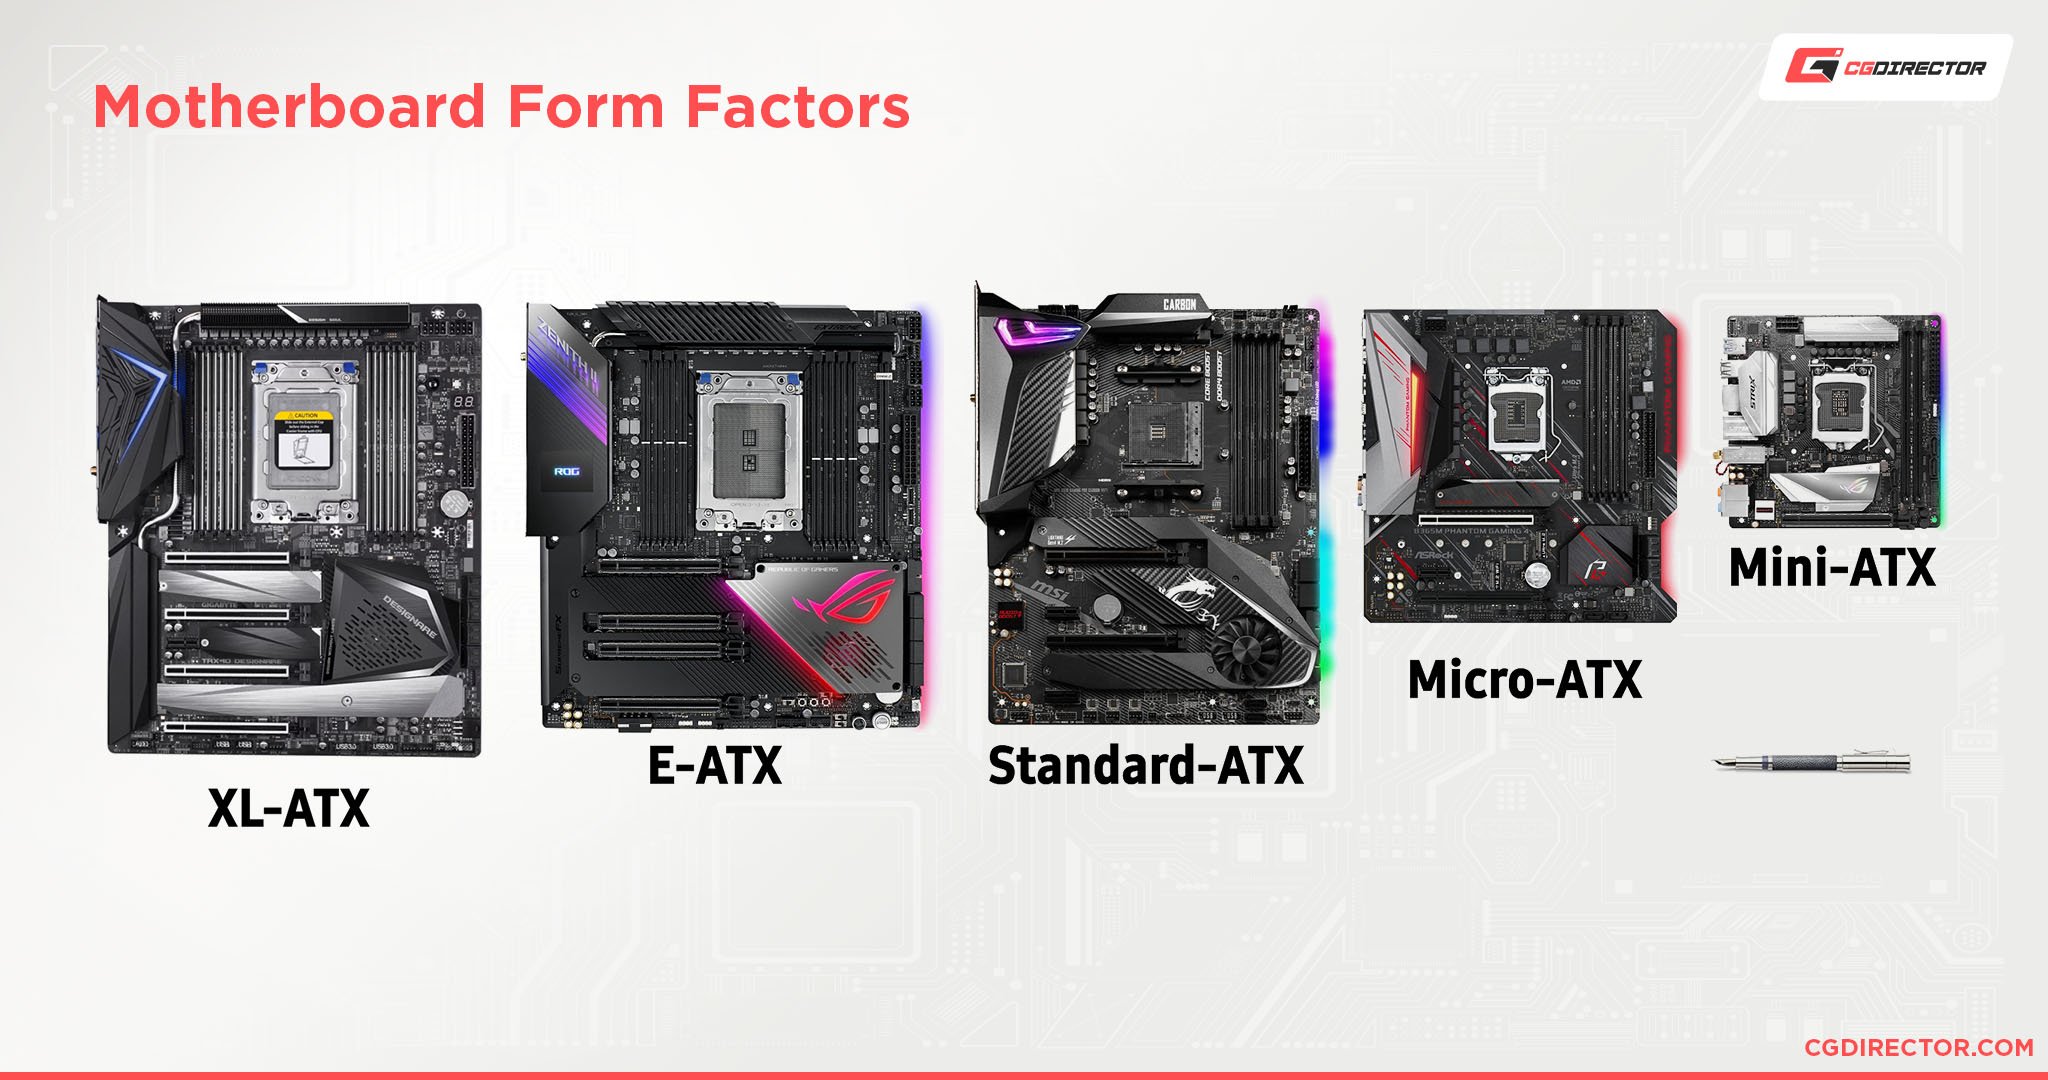 Motherboard Form Factors and Sizes Compared